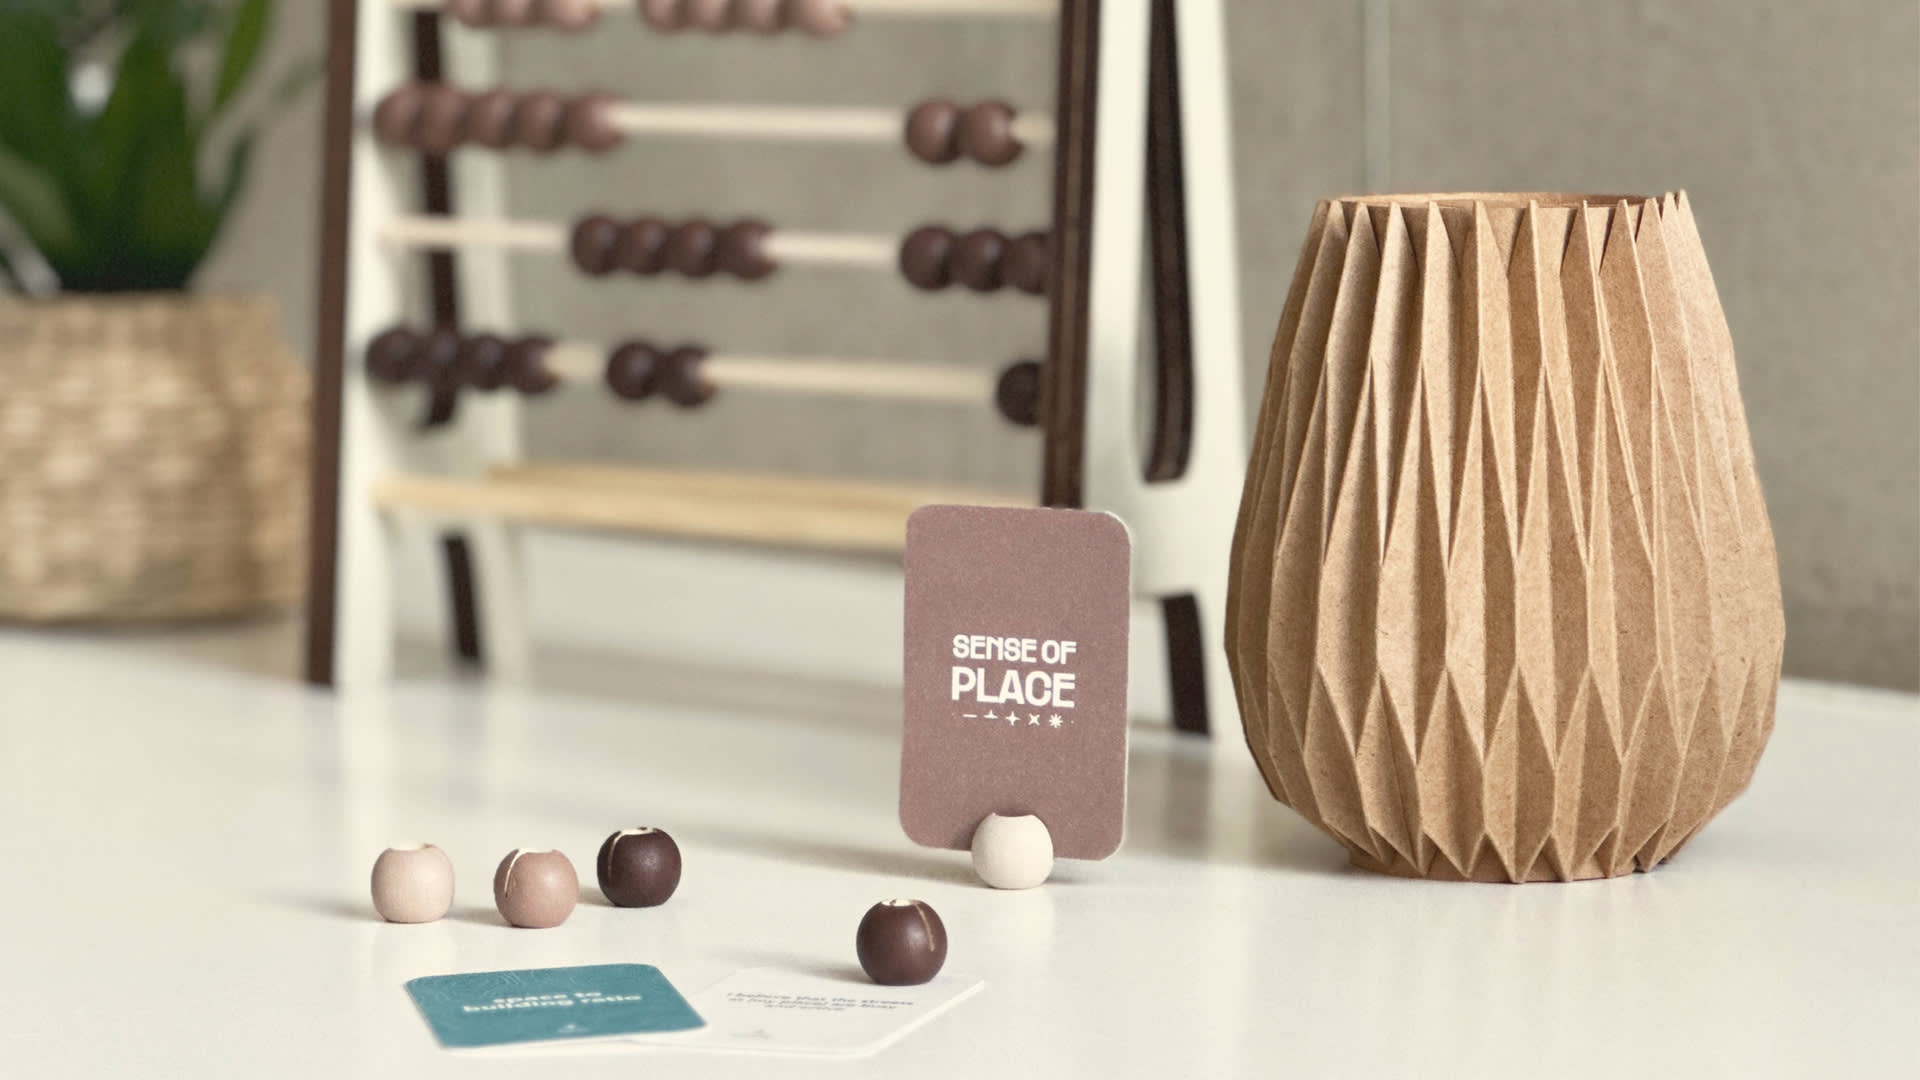 The Sense of Place Toolkit, featuring the companion and several beads and cards scattered in front of the slider.